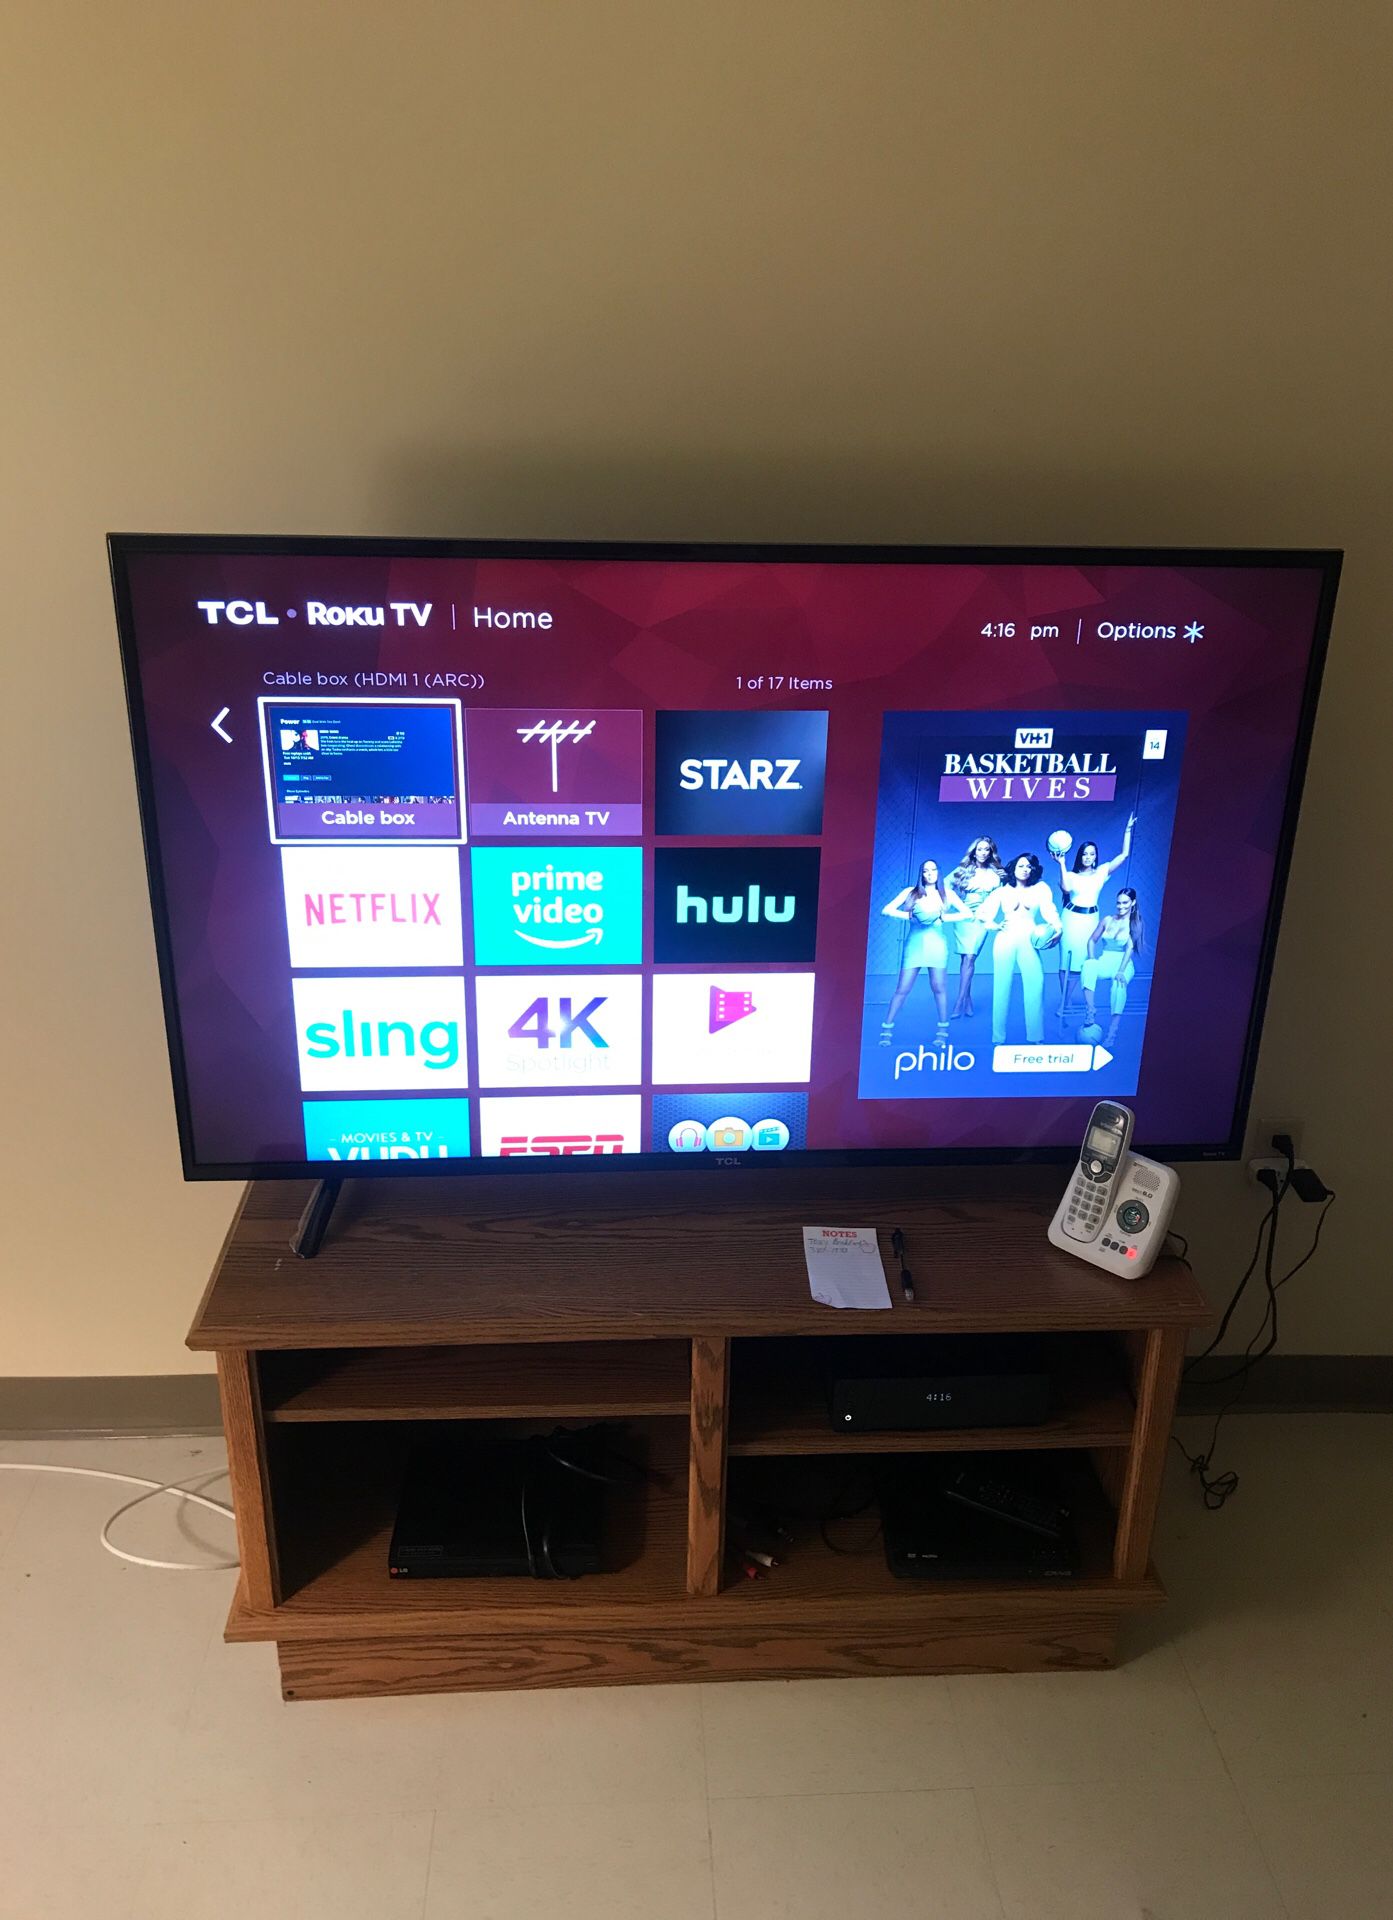 TCL ROKU TV 4K 55” SMART TV Plus TV stand included a$200 values